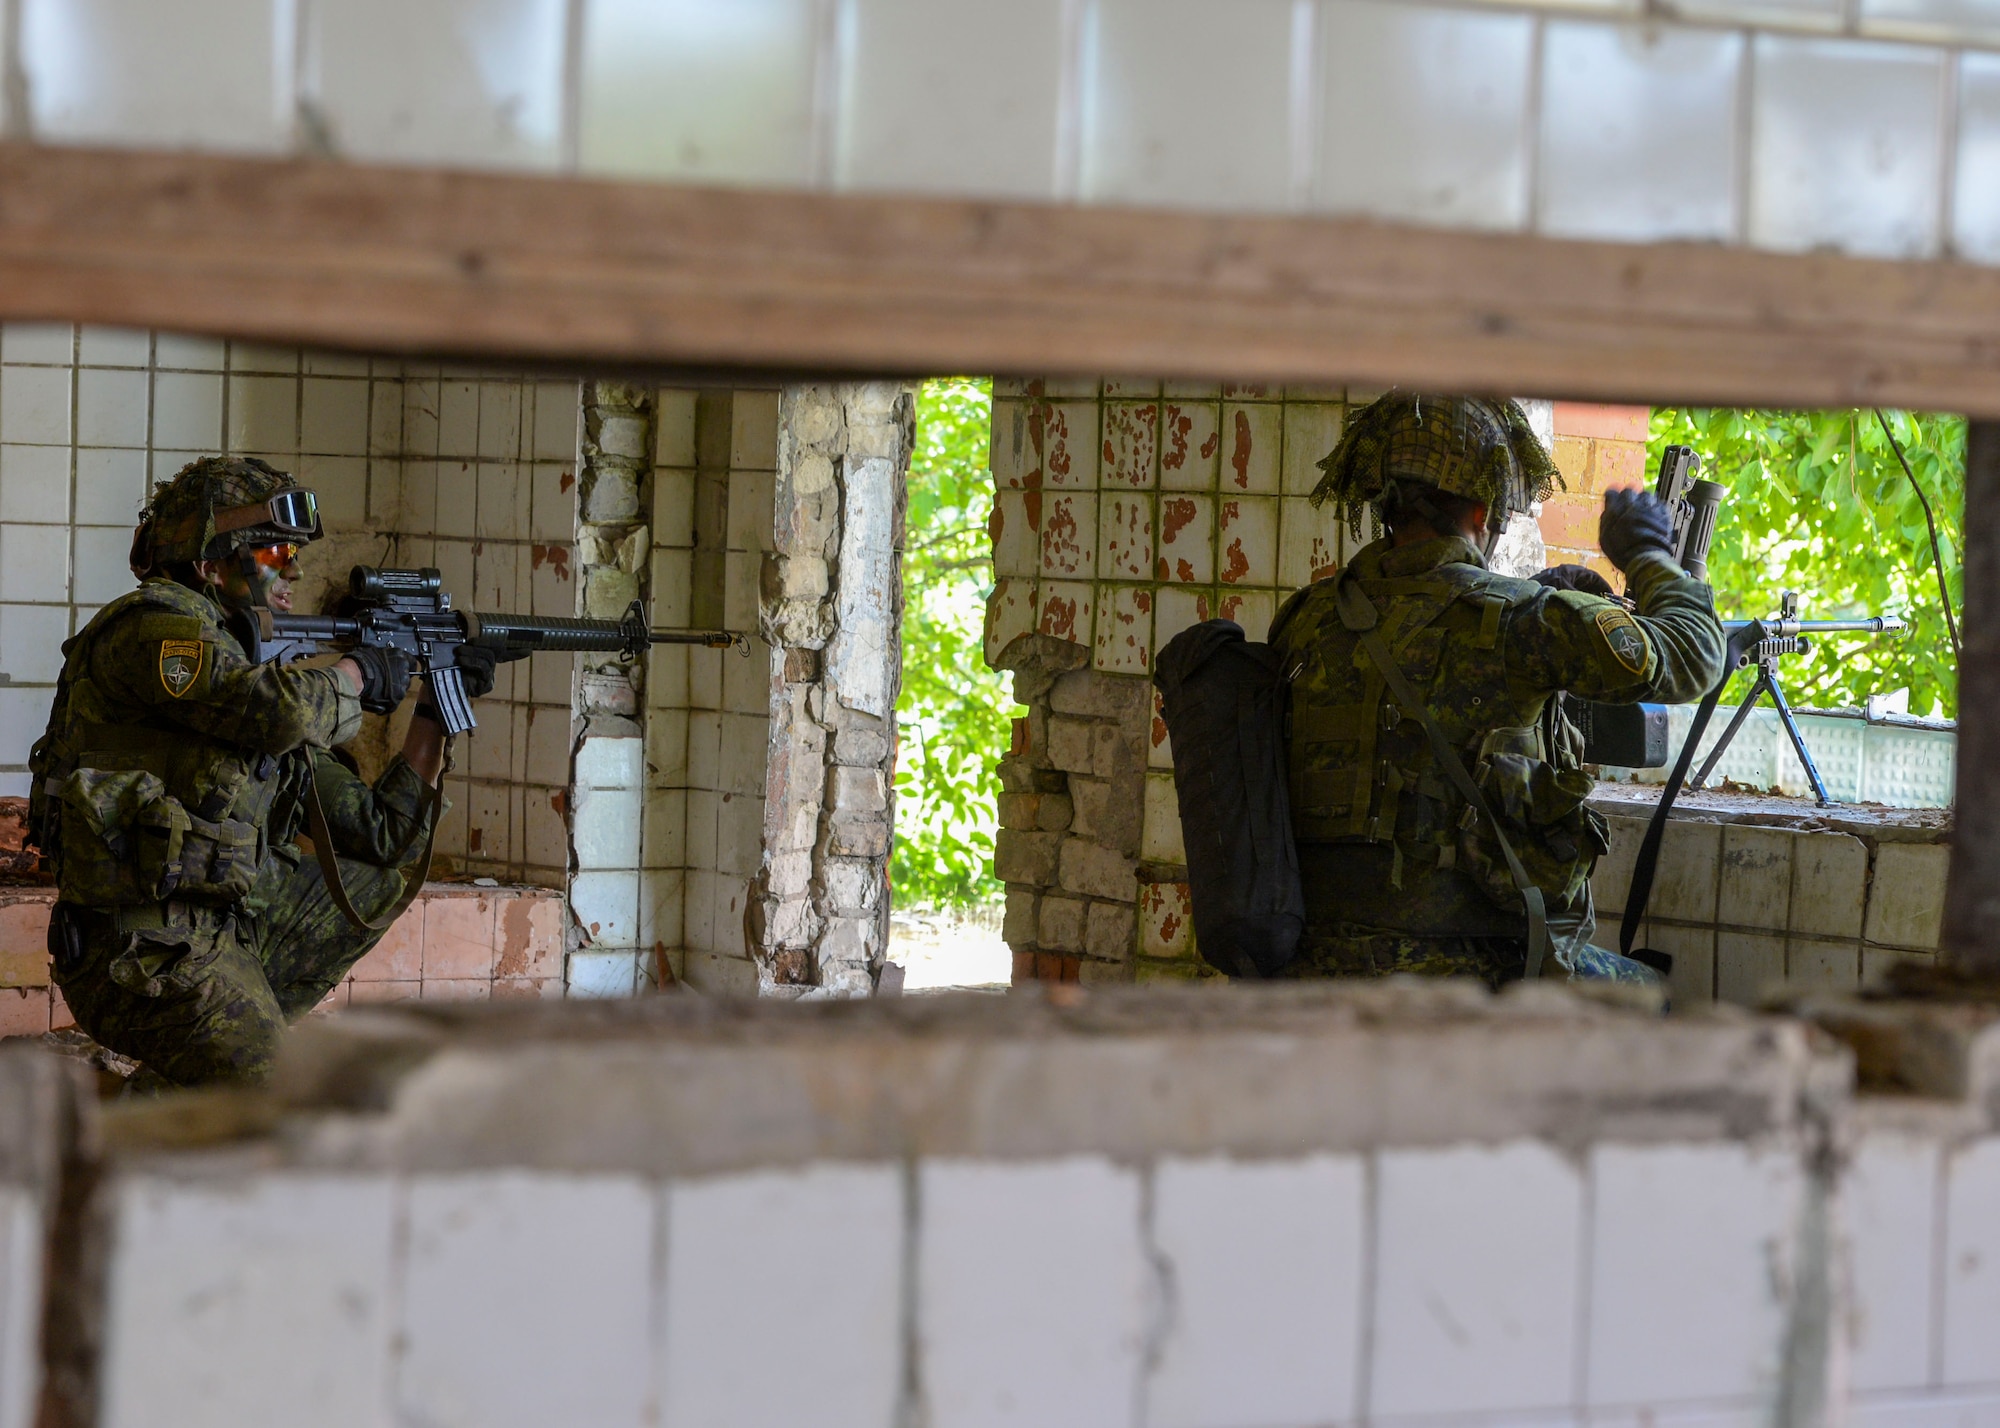 Members of a simulated defense force defend their post during an exercise in Skrunda, Latvia on June 13, 2018. The exercise was a part of Saber Strike 18 and featured a defending force comprised of Spanish, Italian, Canadian and Latvian Platoons; and an attacking force comprised of U.S. Marines, United Kingdom Royal Marines, Michigan Army National Guard, and Norwegian Forces. Saber Strike 18 is the eighth iteration of the long-standing U.S. Army Europe-led cooperative training exercise enhancing interoperability among allies and regional partners.  (U.S. Air Force photo by Staff Sgt. Jimmie D. Pike)